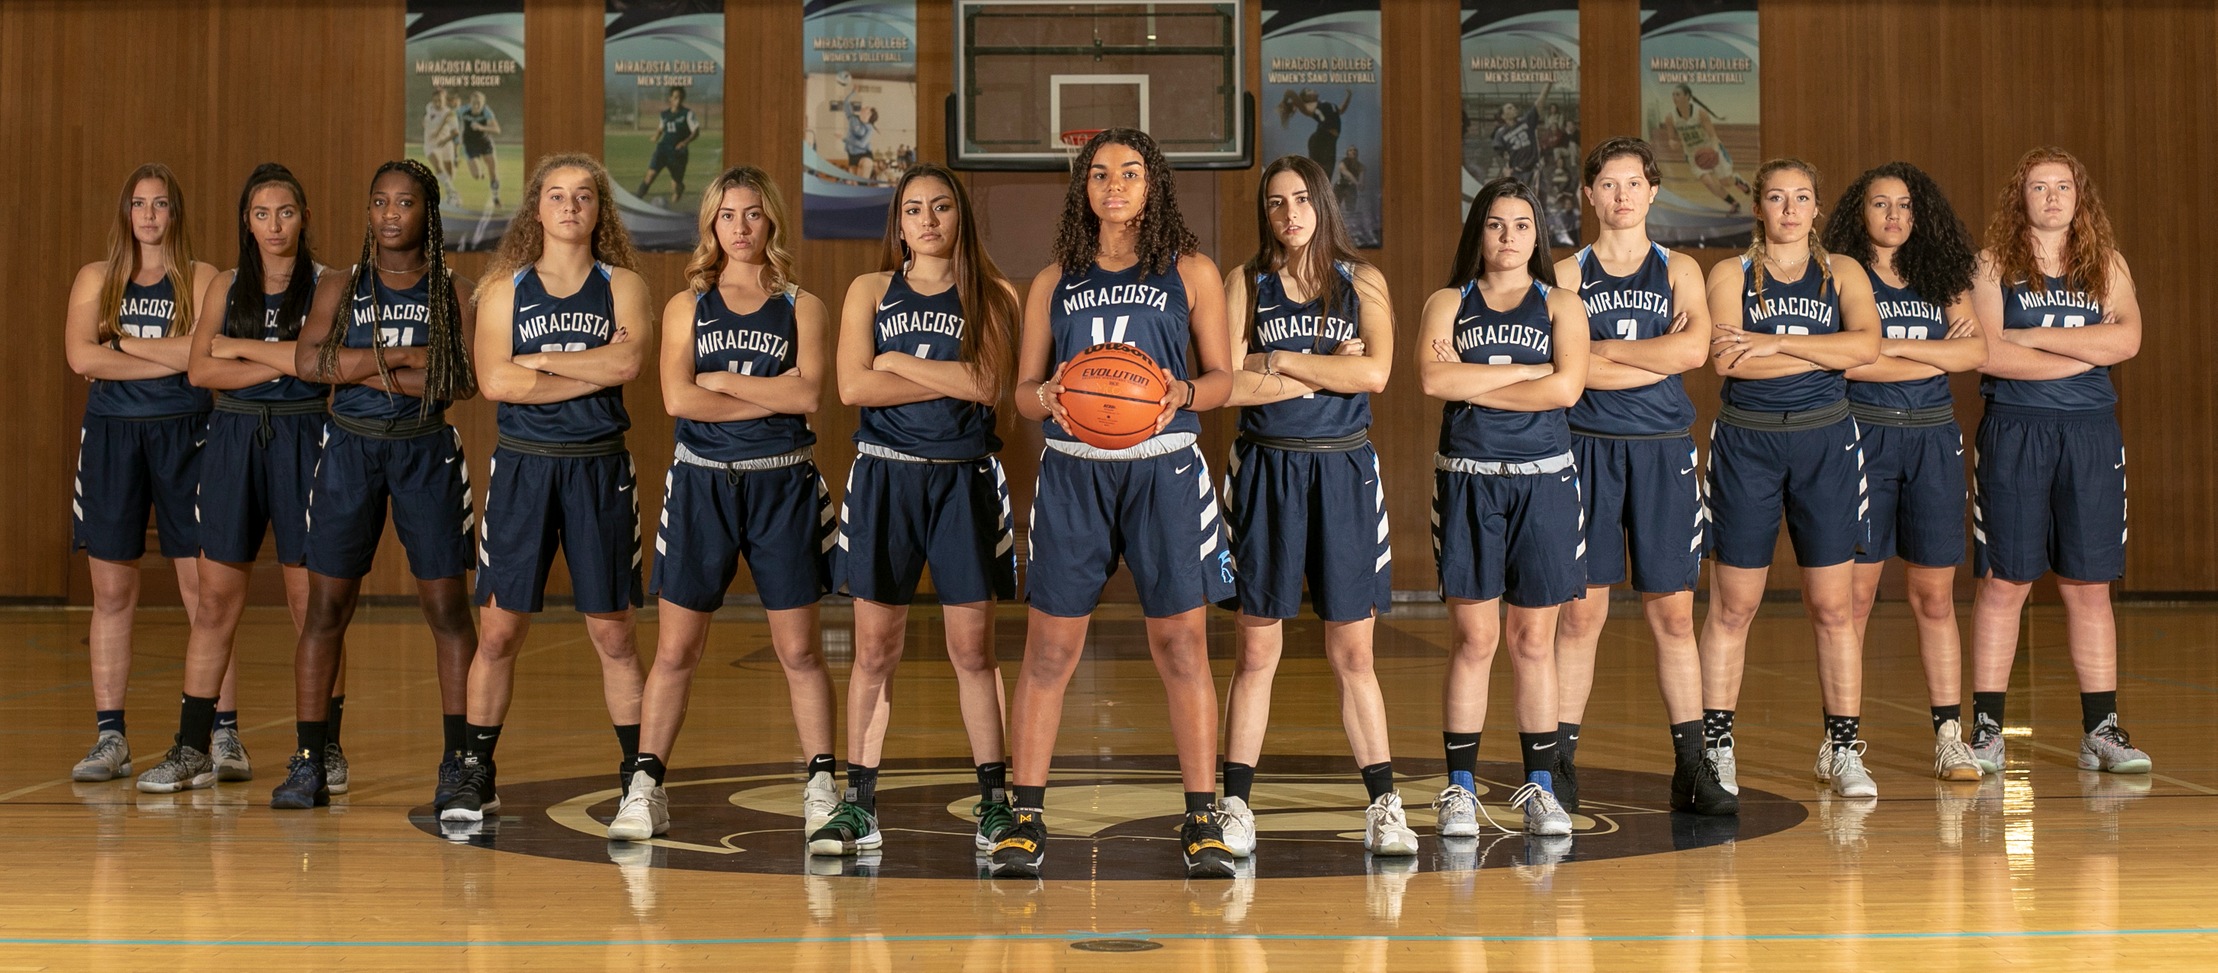 Women's Basketball team picture.